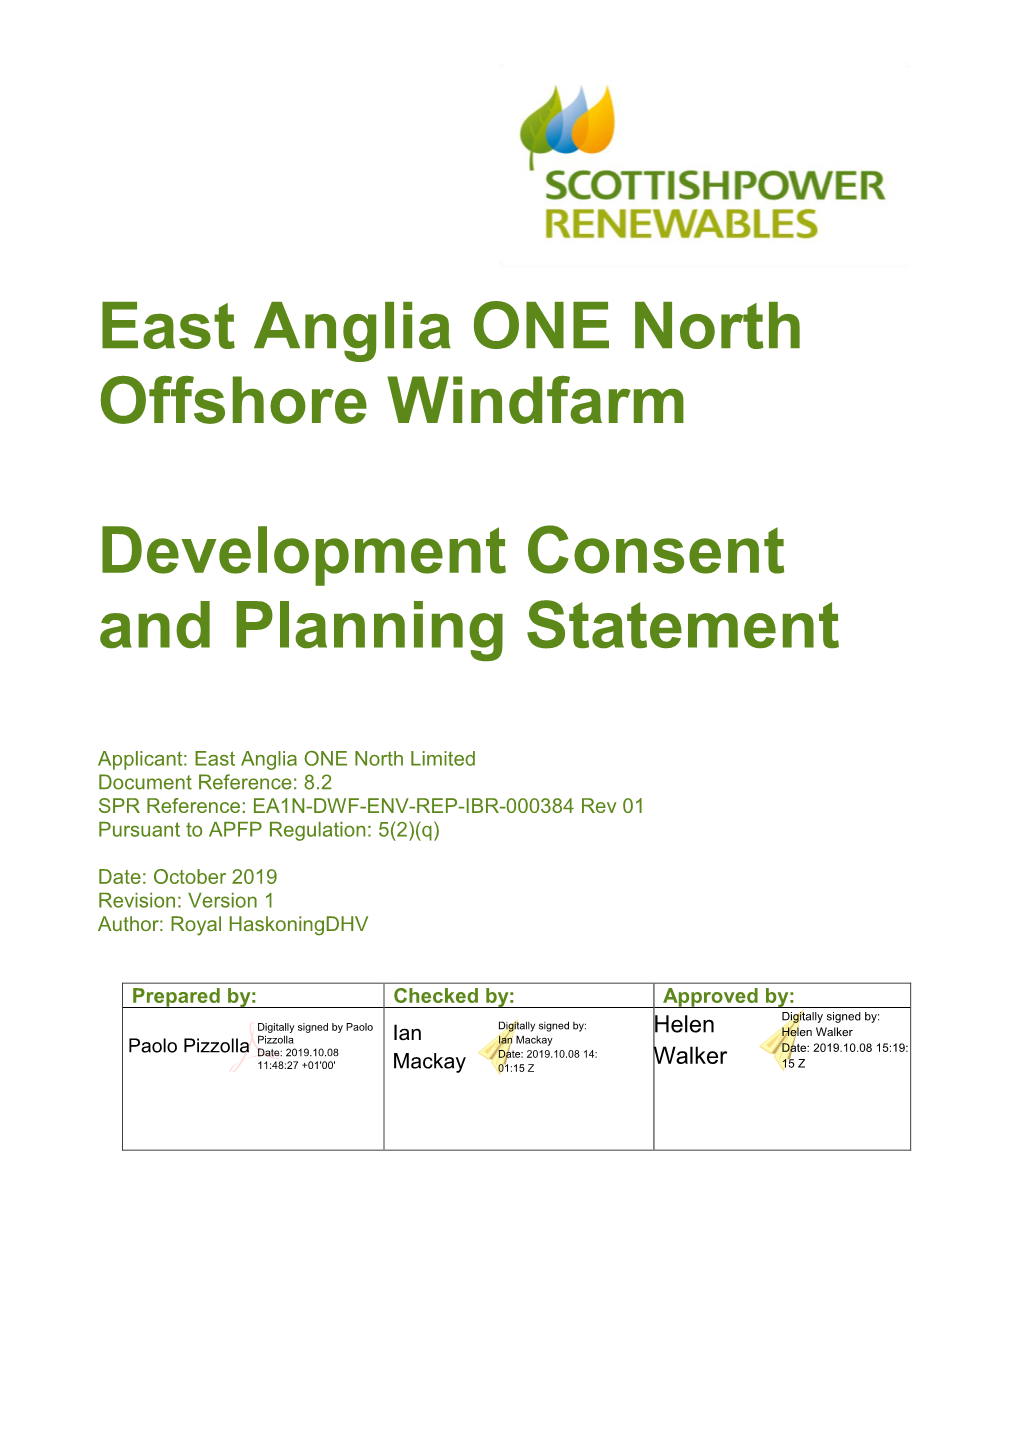 East Anglia ONE North Offshore Windfarm Development Consent and Planning Statement